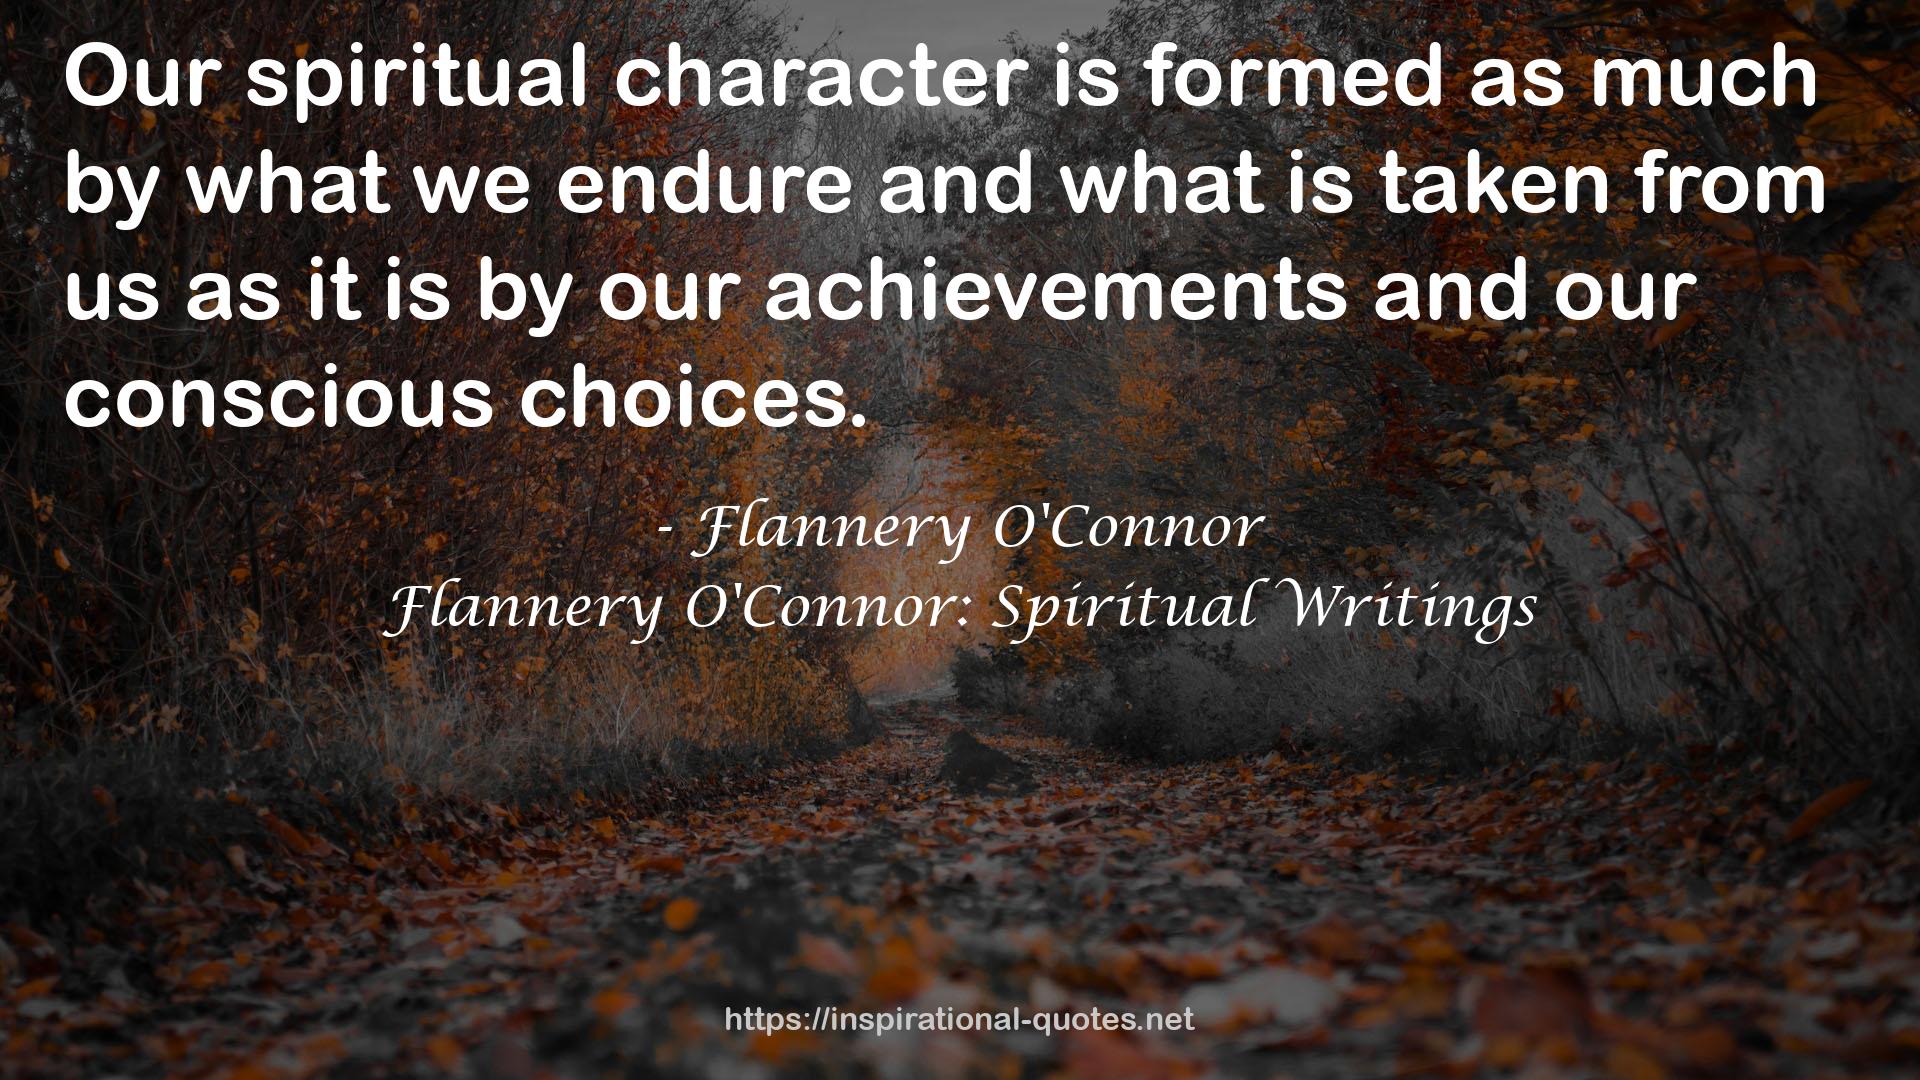 Flannery O'Connor: Spiritual Writings QUOTES